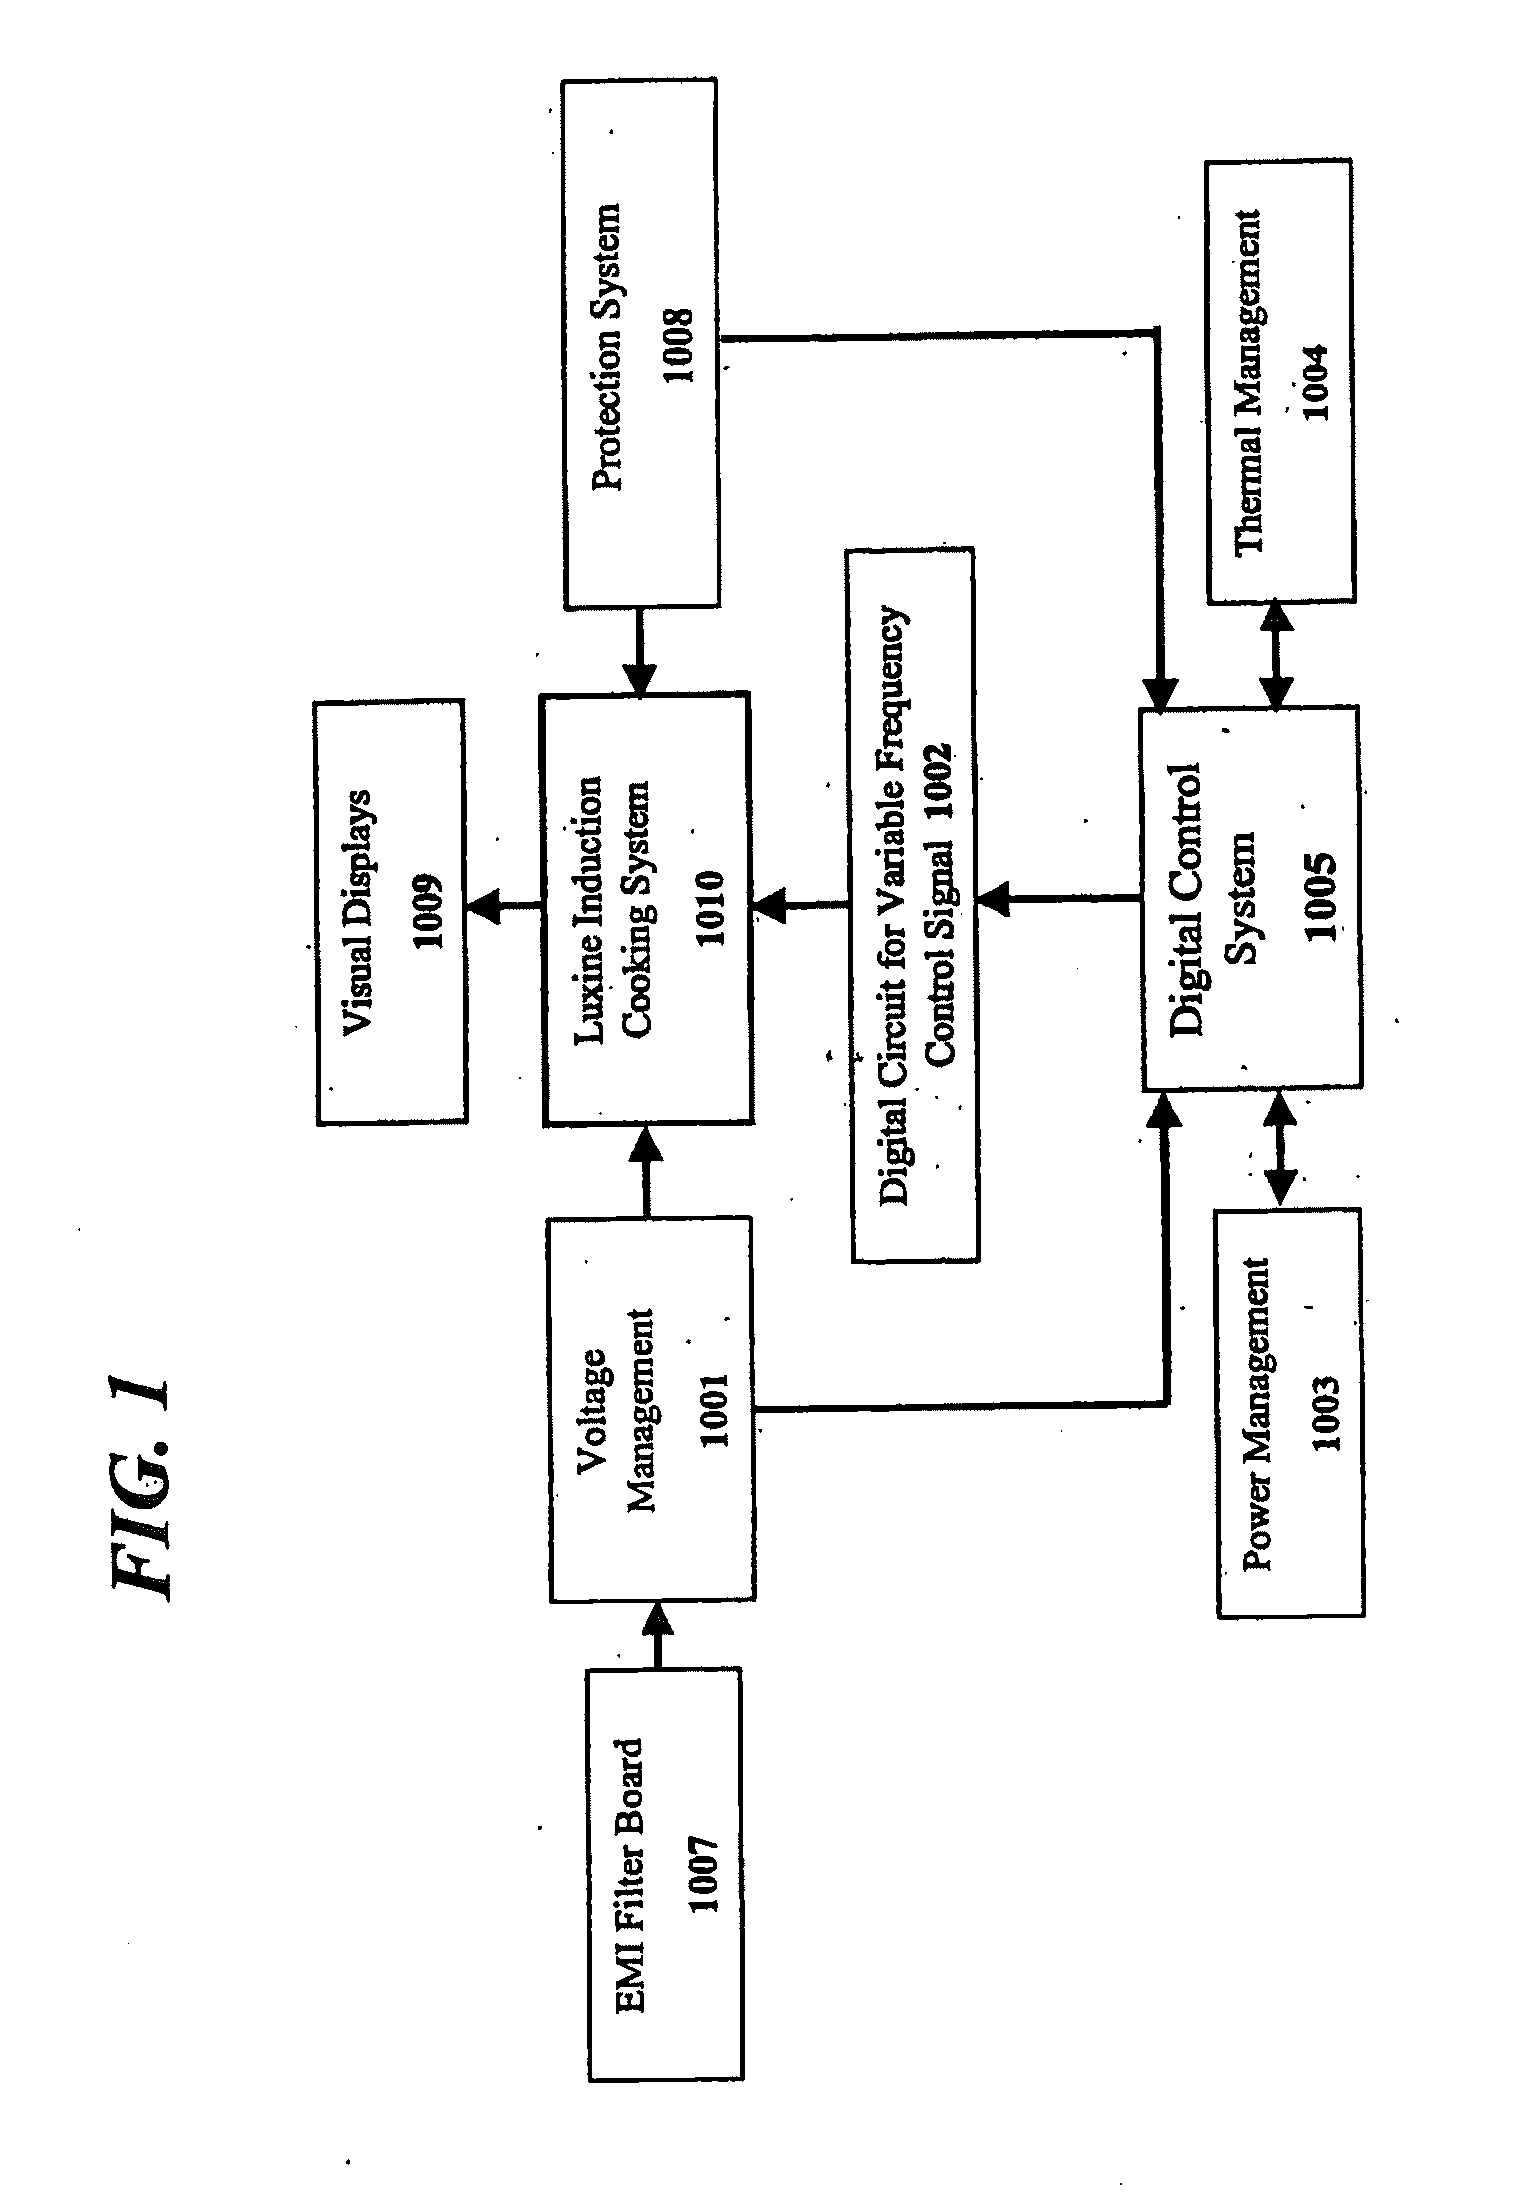 Induction Heating and Control System and Method with High Reliability and Advanced Performance Features